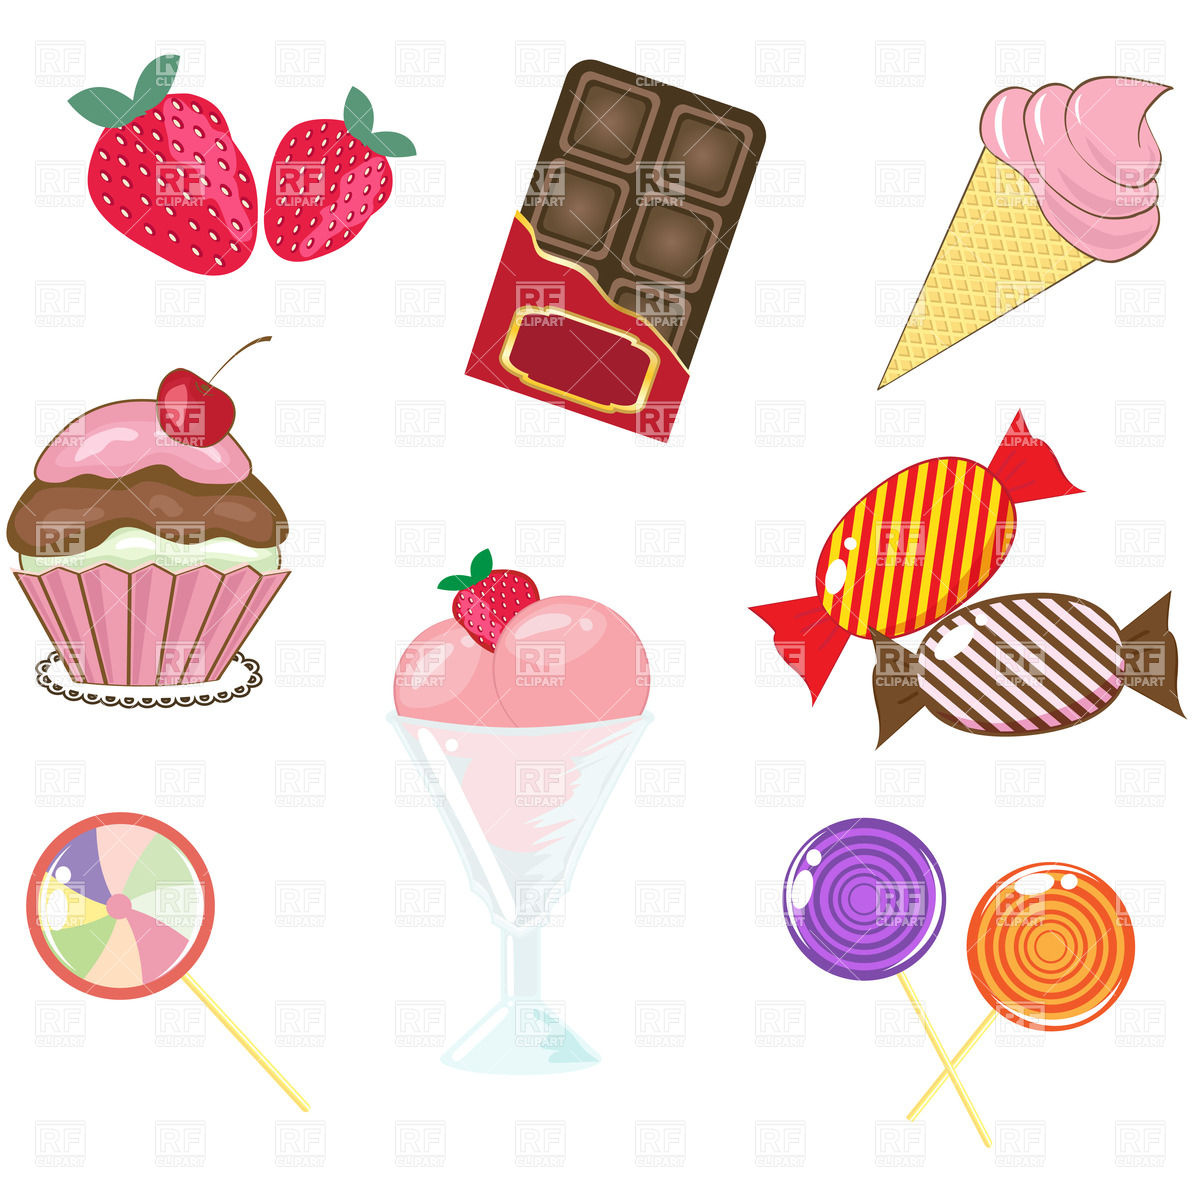 Cake Pops   Desserts And Sweets 22796 Download Royalty Free Vector